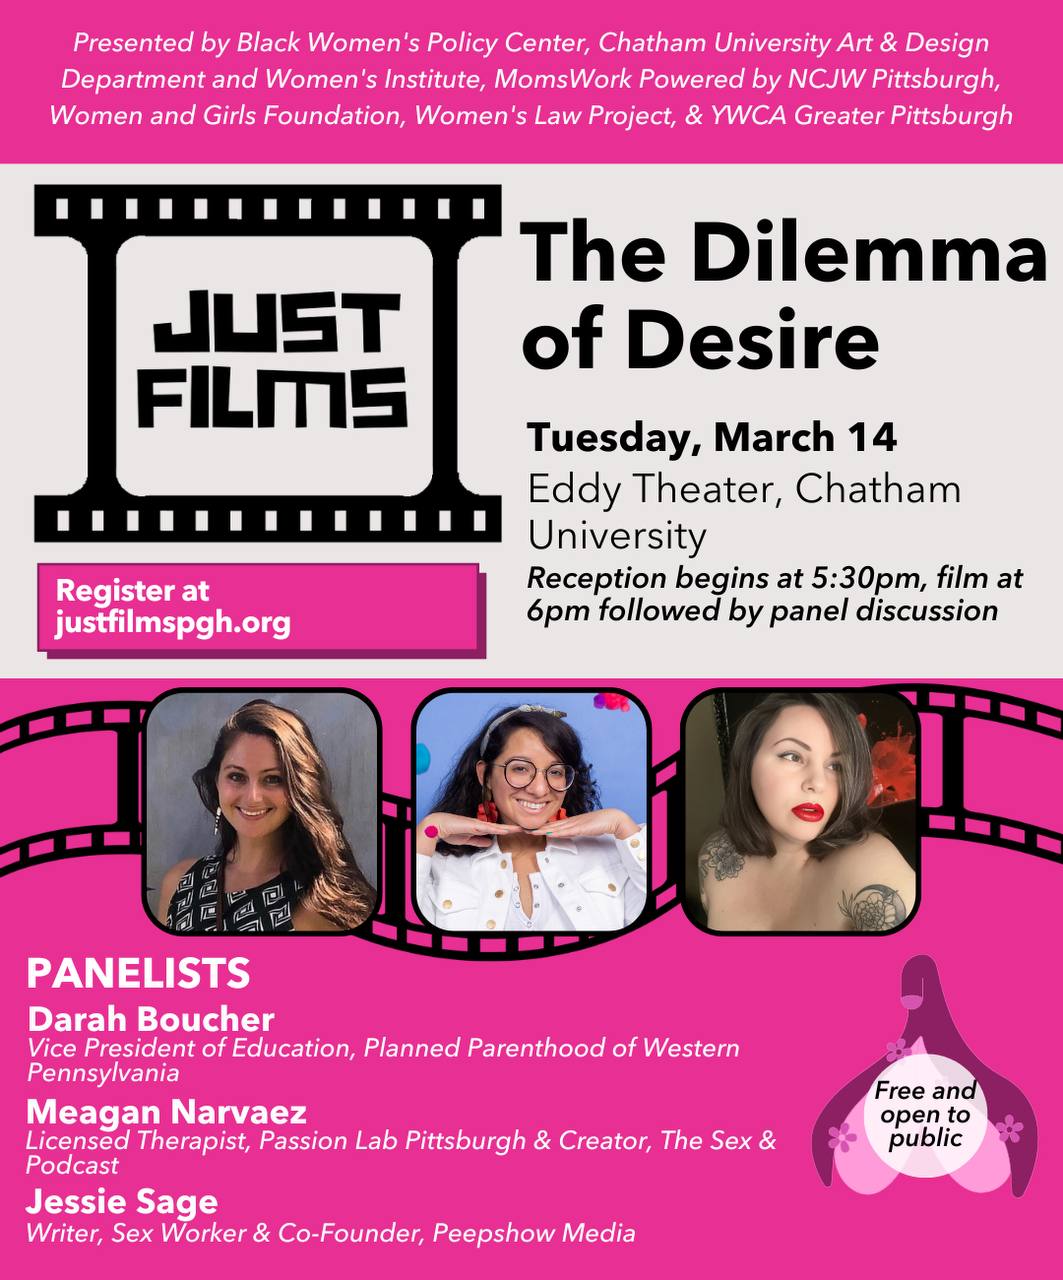 Just Films: The Dilemma of Desire